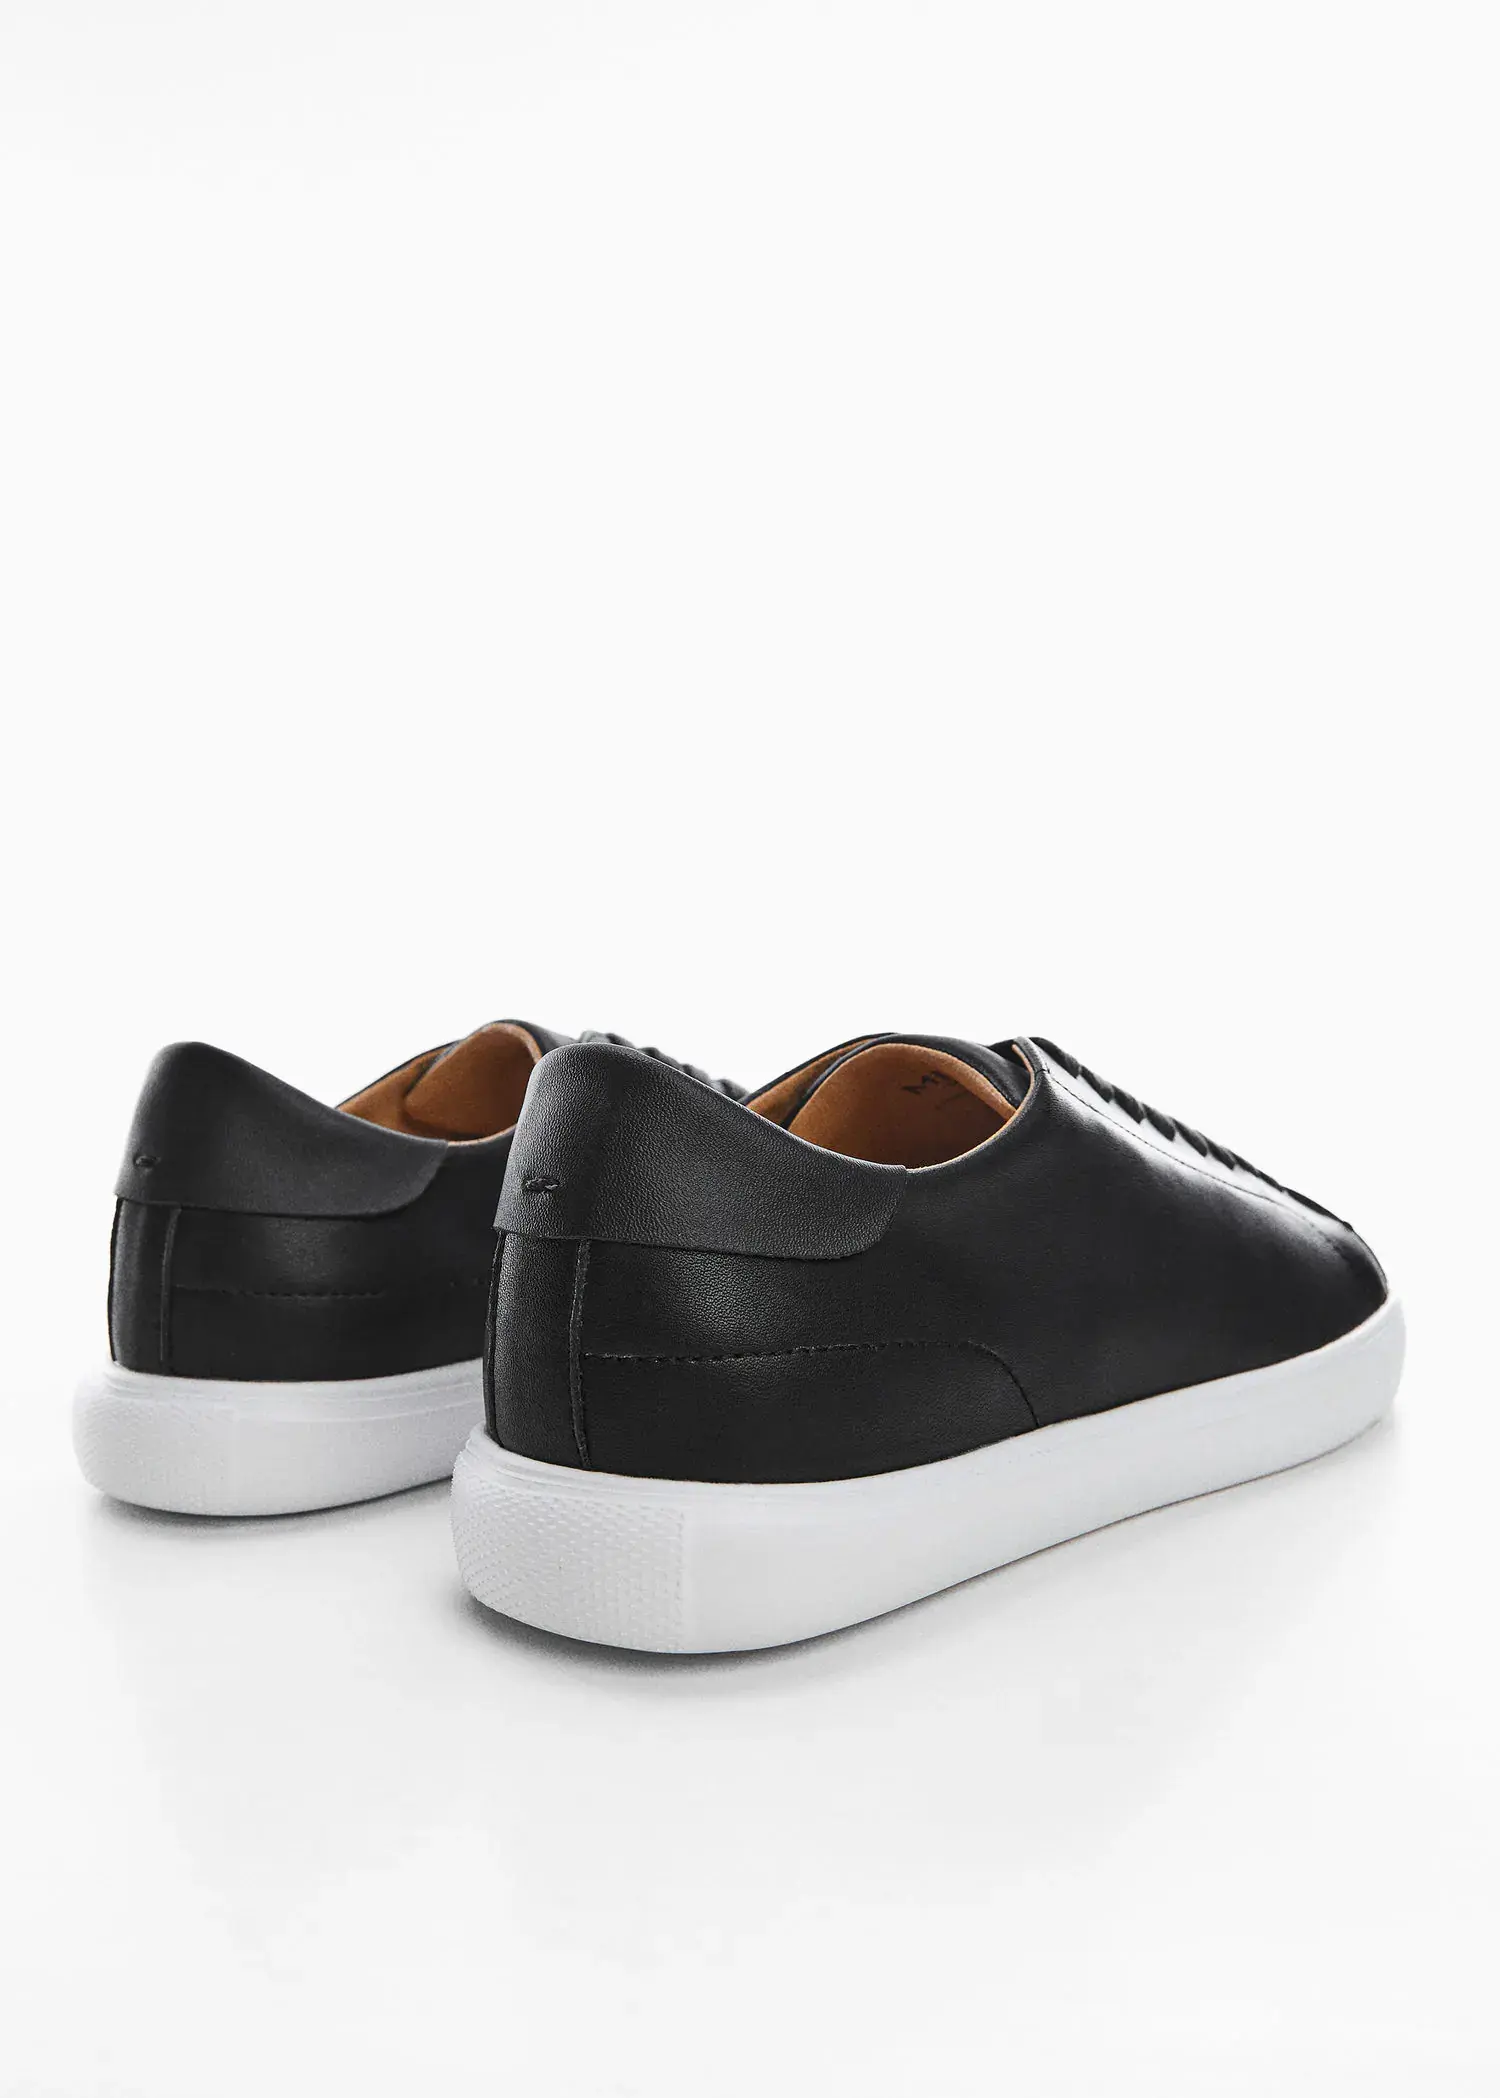 Mango Monocoloured leather sneakers. a pair of black sneakers on a white surface. 